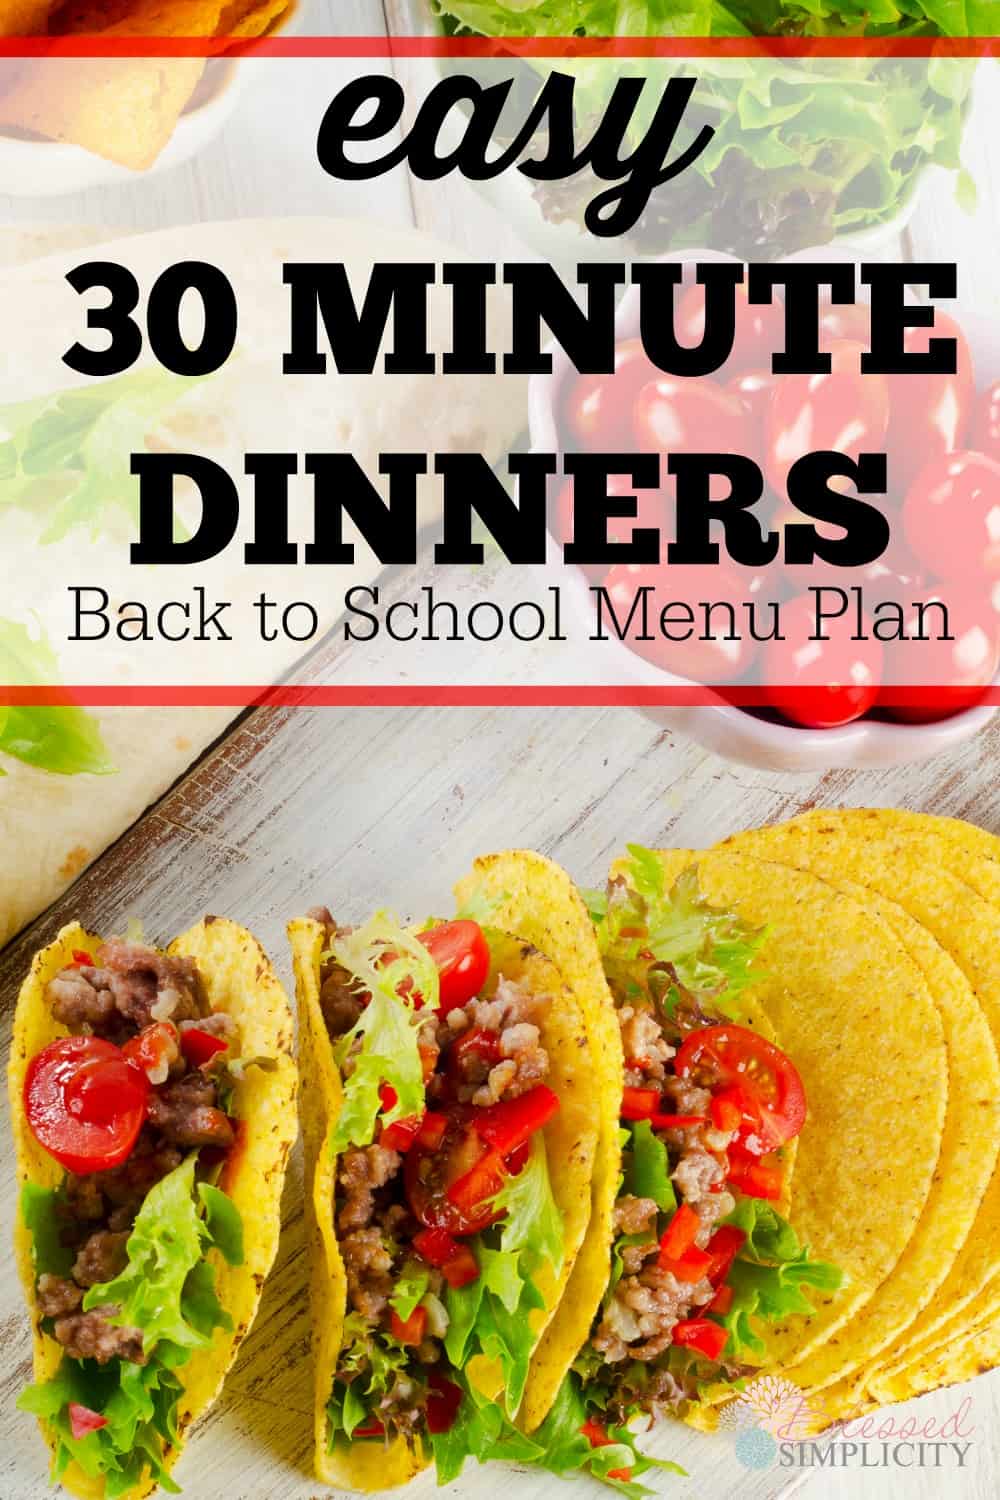 Back to school dinner time will be easy with this month of 30 minute dinners menu plan!